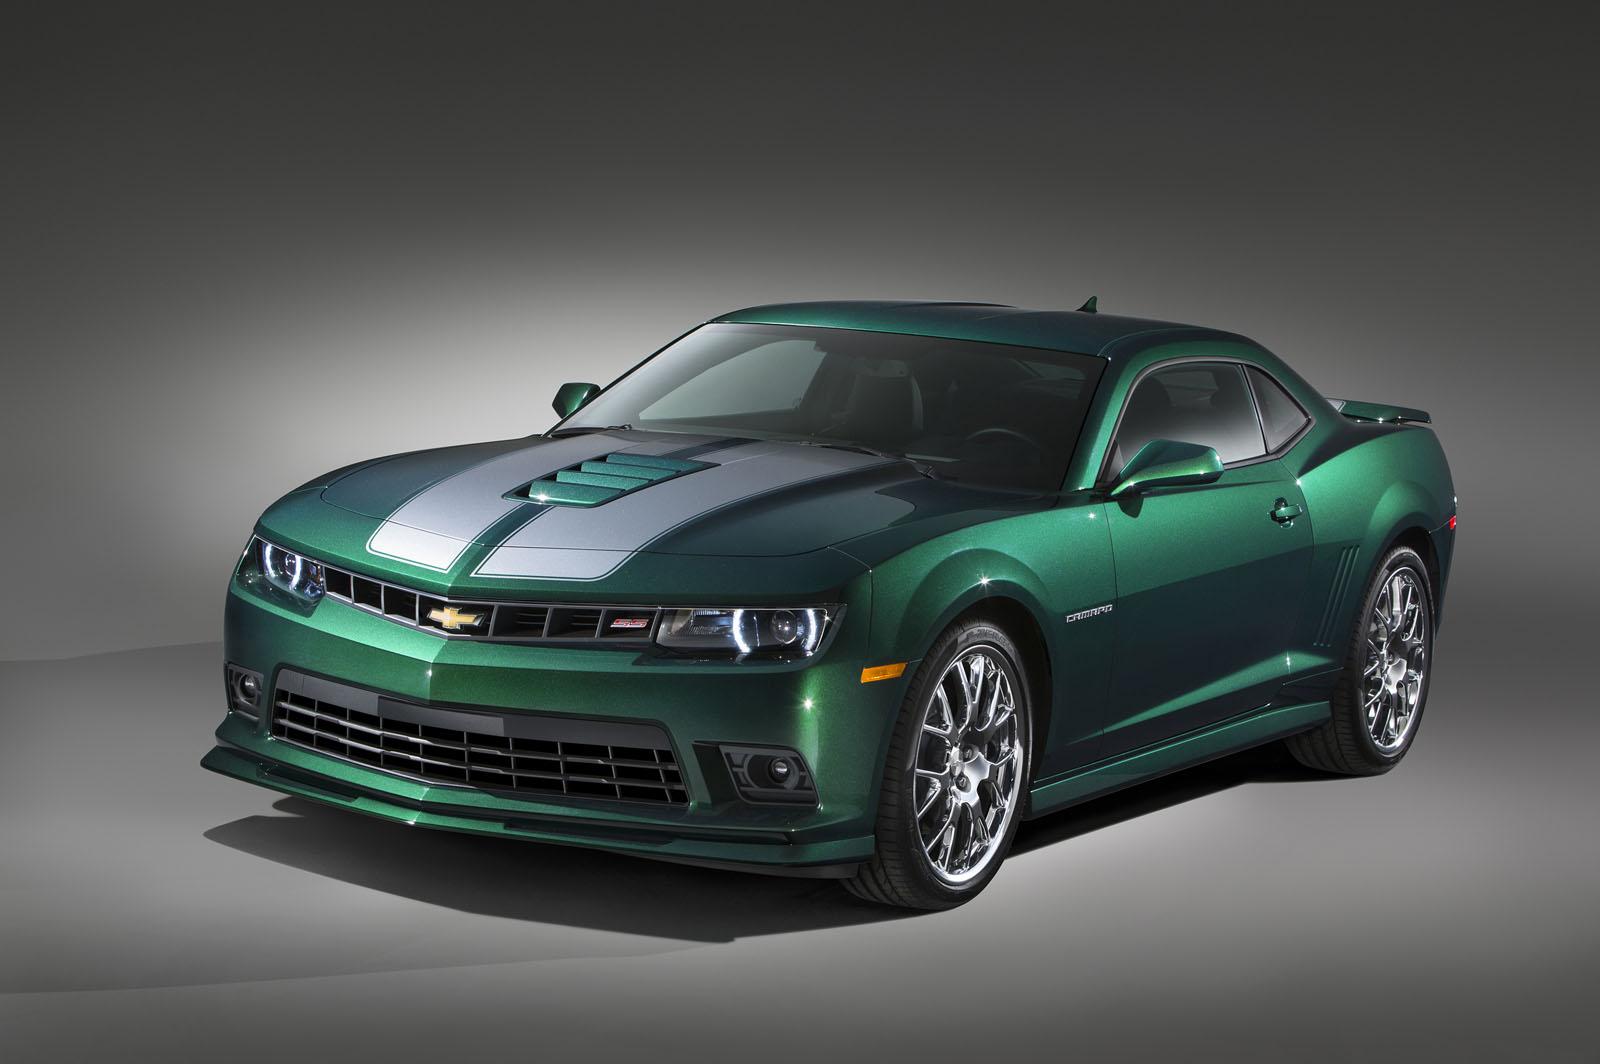 chevrolet-wants-you-to-namethatcamaro-spring-special-edition-for-sema-video-photo-gallery_1